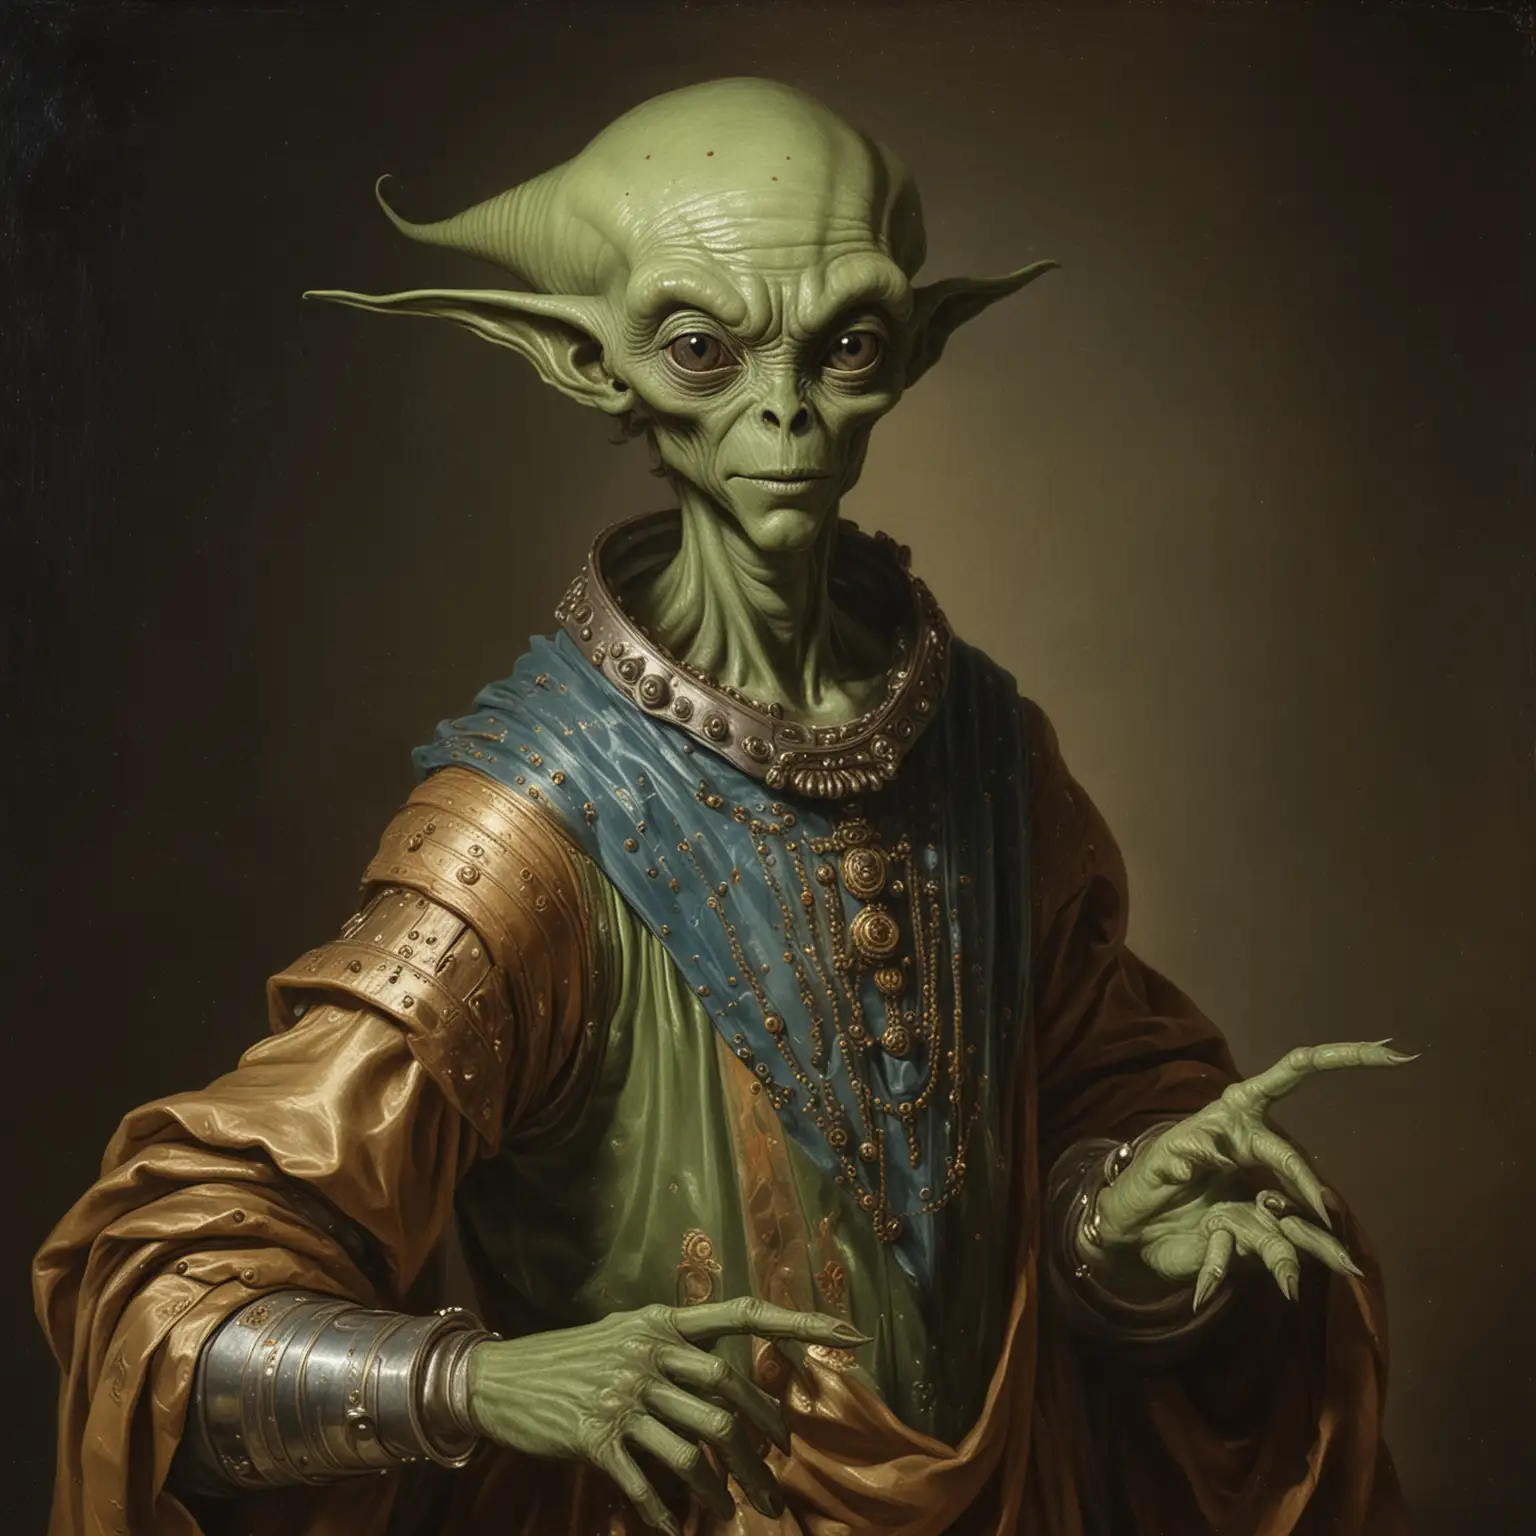 Make a friendly alien, 17th century painting